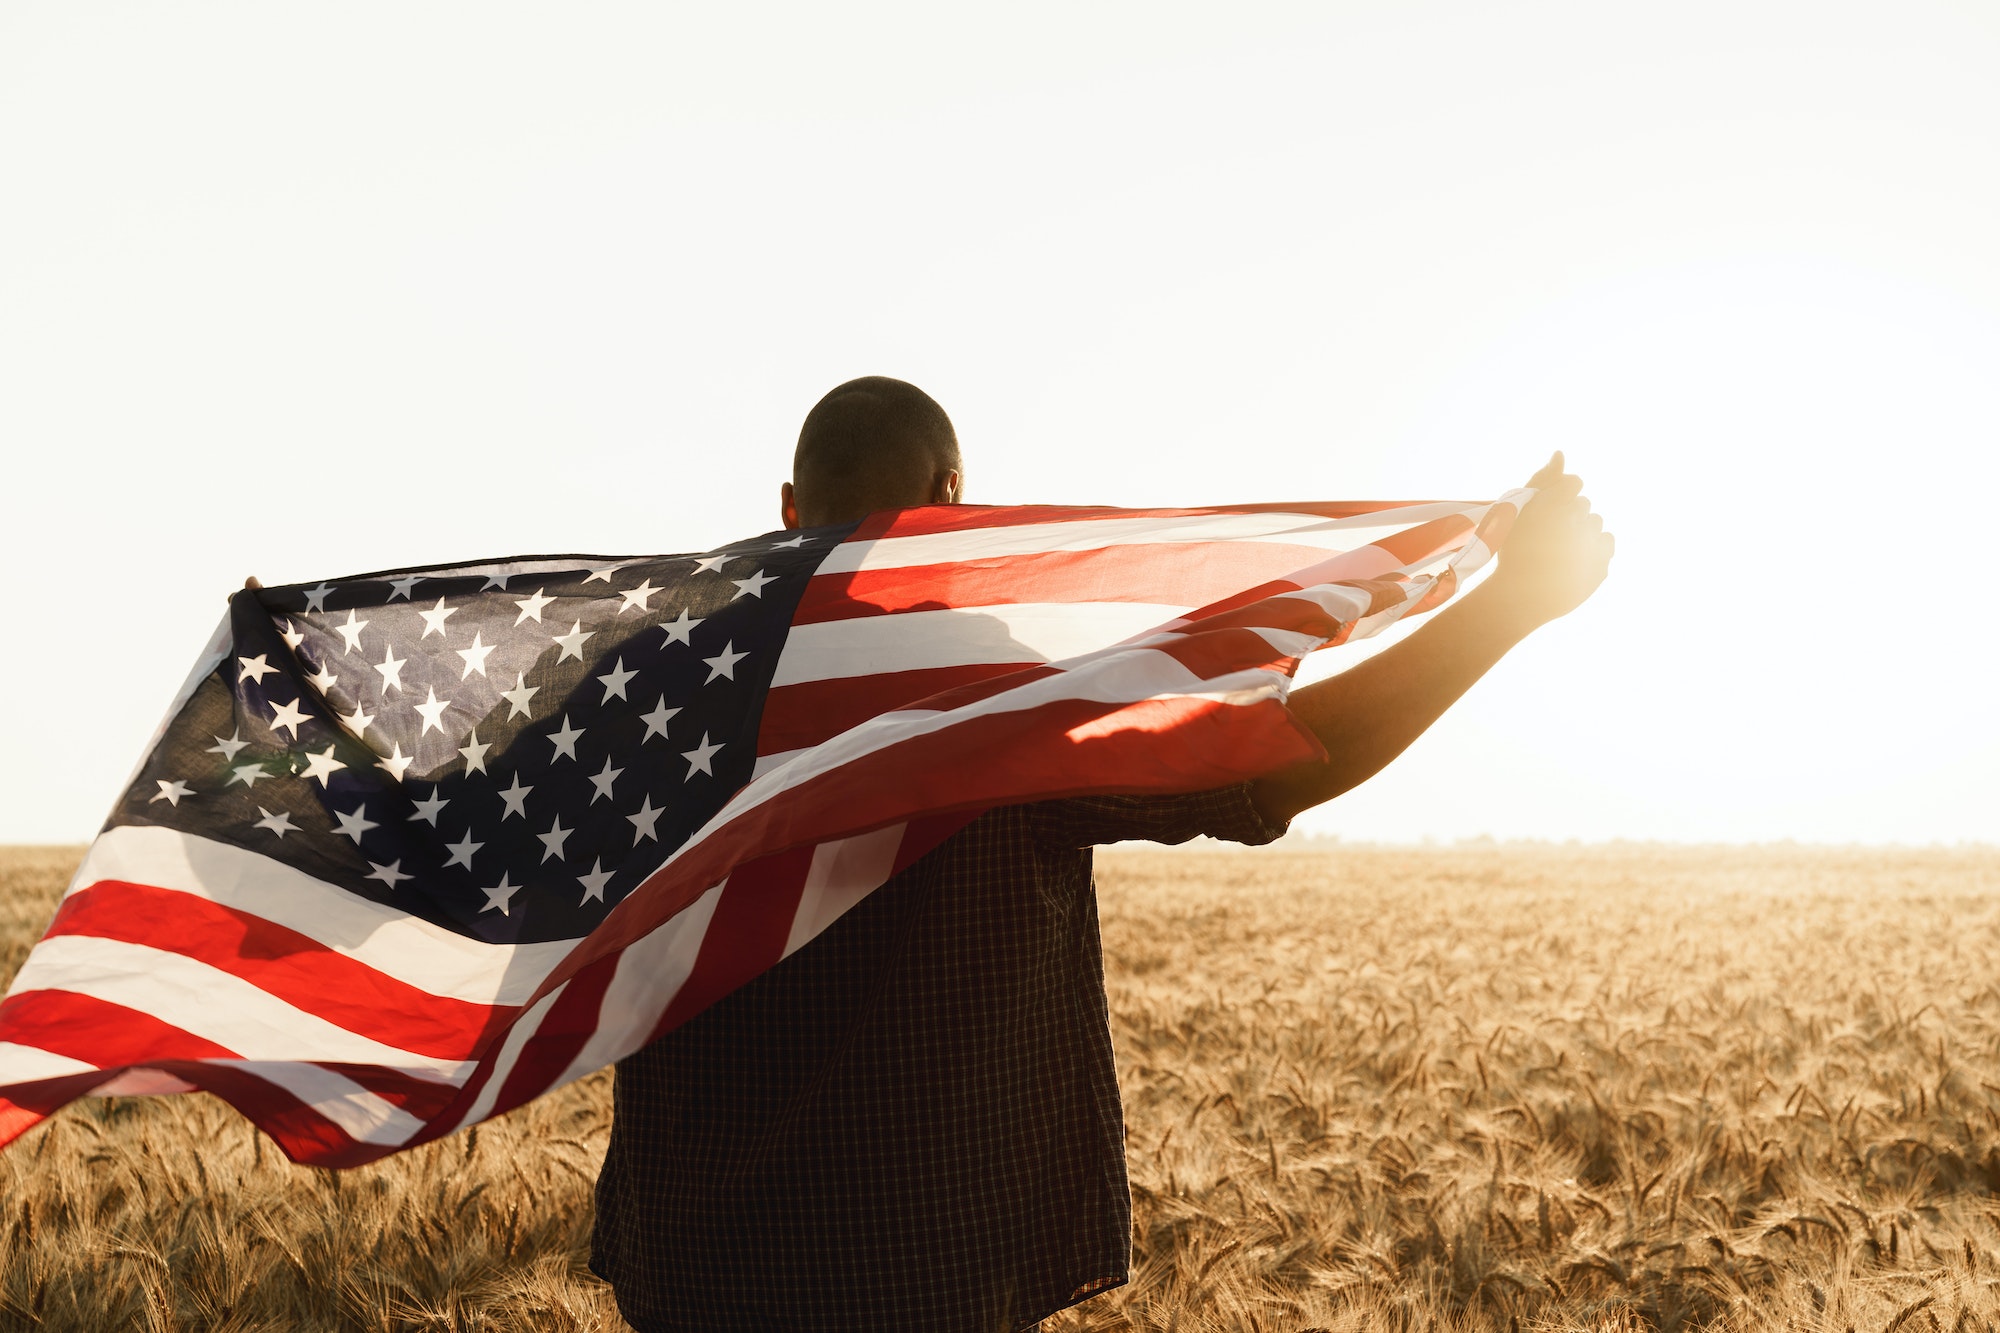 Young man holding American flag on back while standing in wheat field